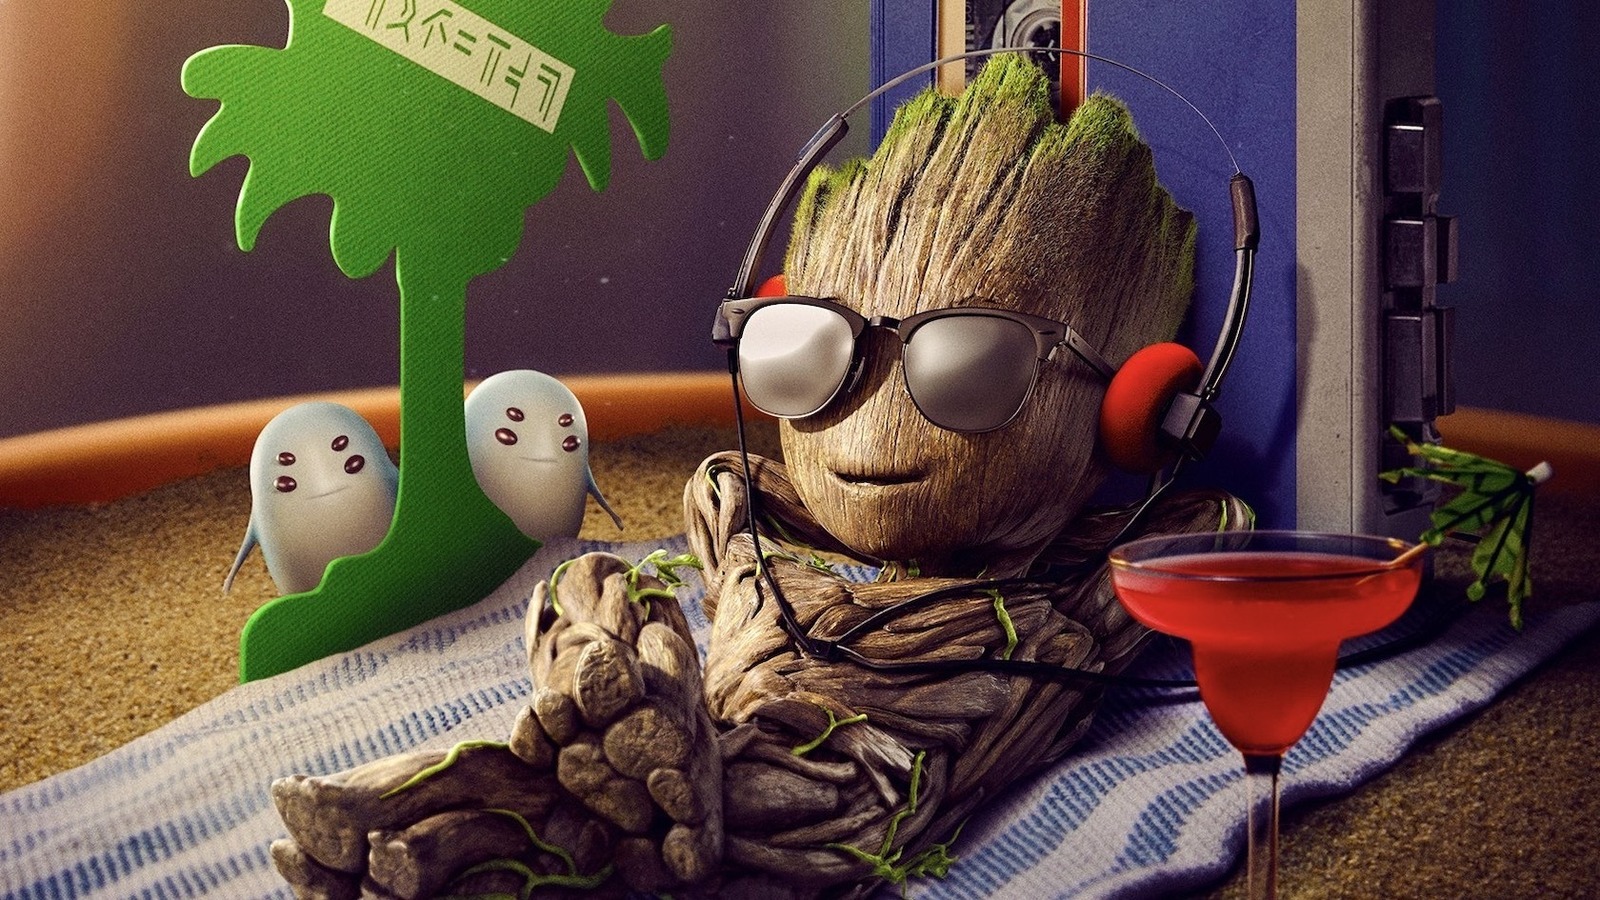 #I Am Groot Animated Shorts Coming To Disney+ In August 2022